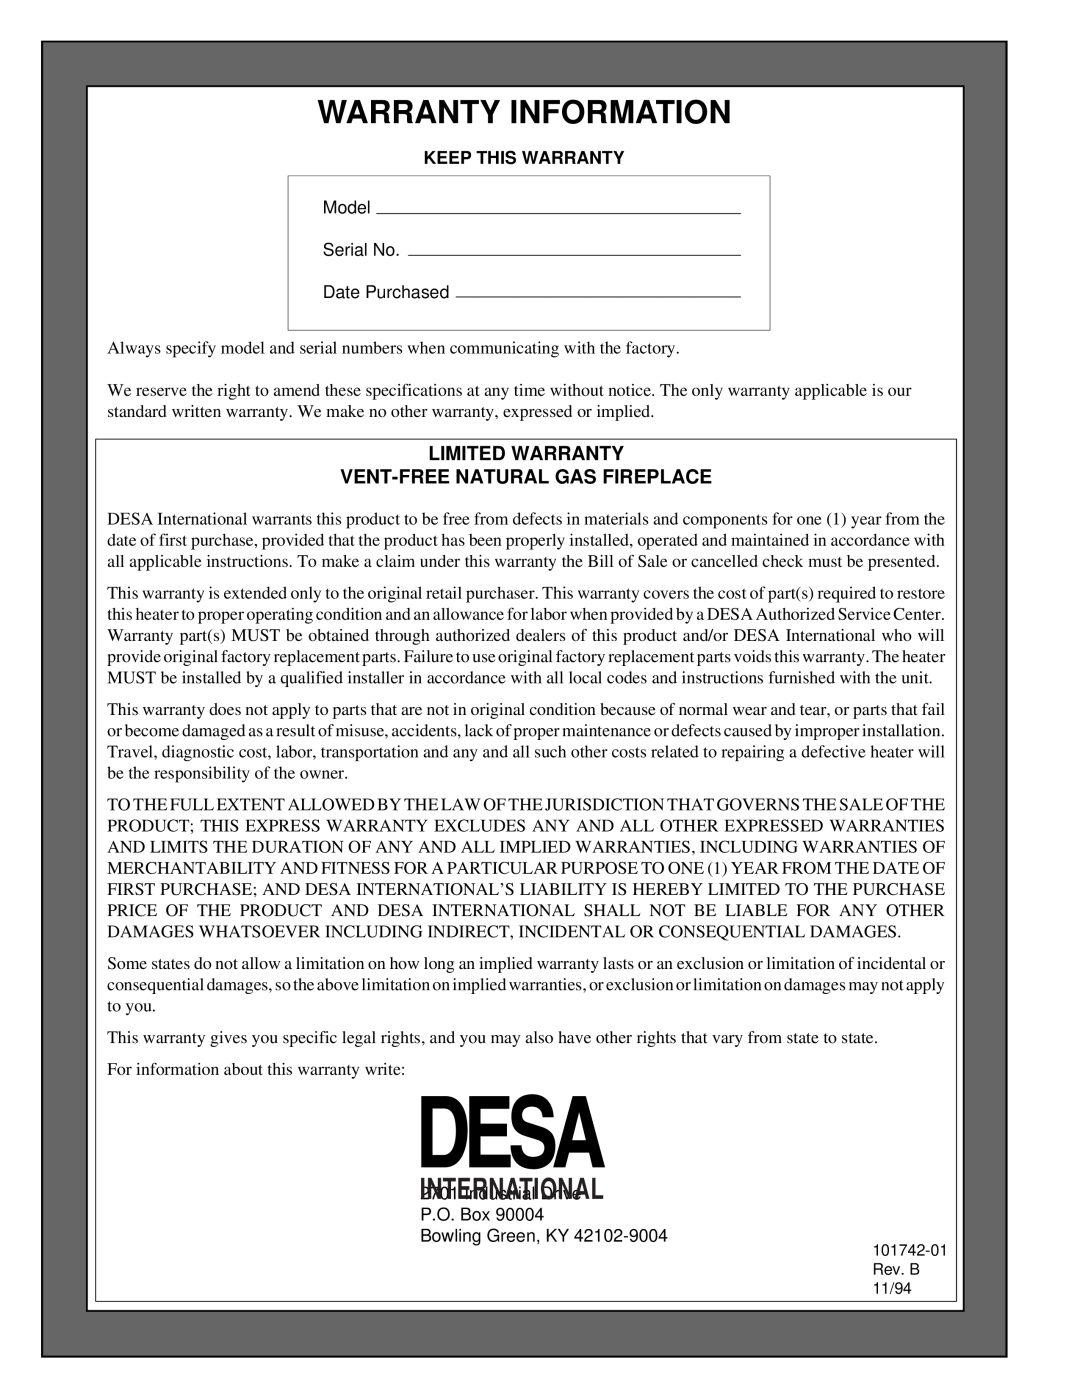 Desa UNVENTED (VENT-FREE) NATURAL GAS FIREPLACE Warranty Information, Limited Warranty Vent-Freenatural Gas Fireplace 